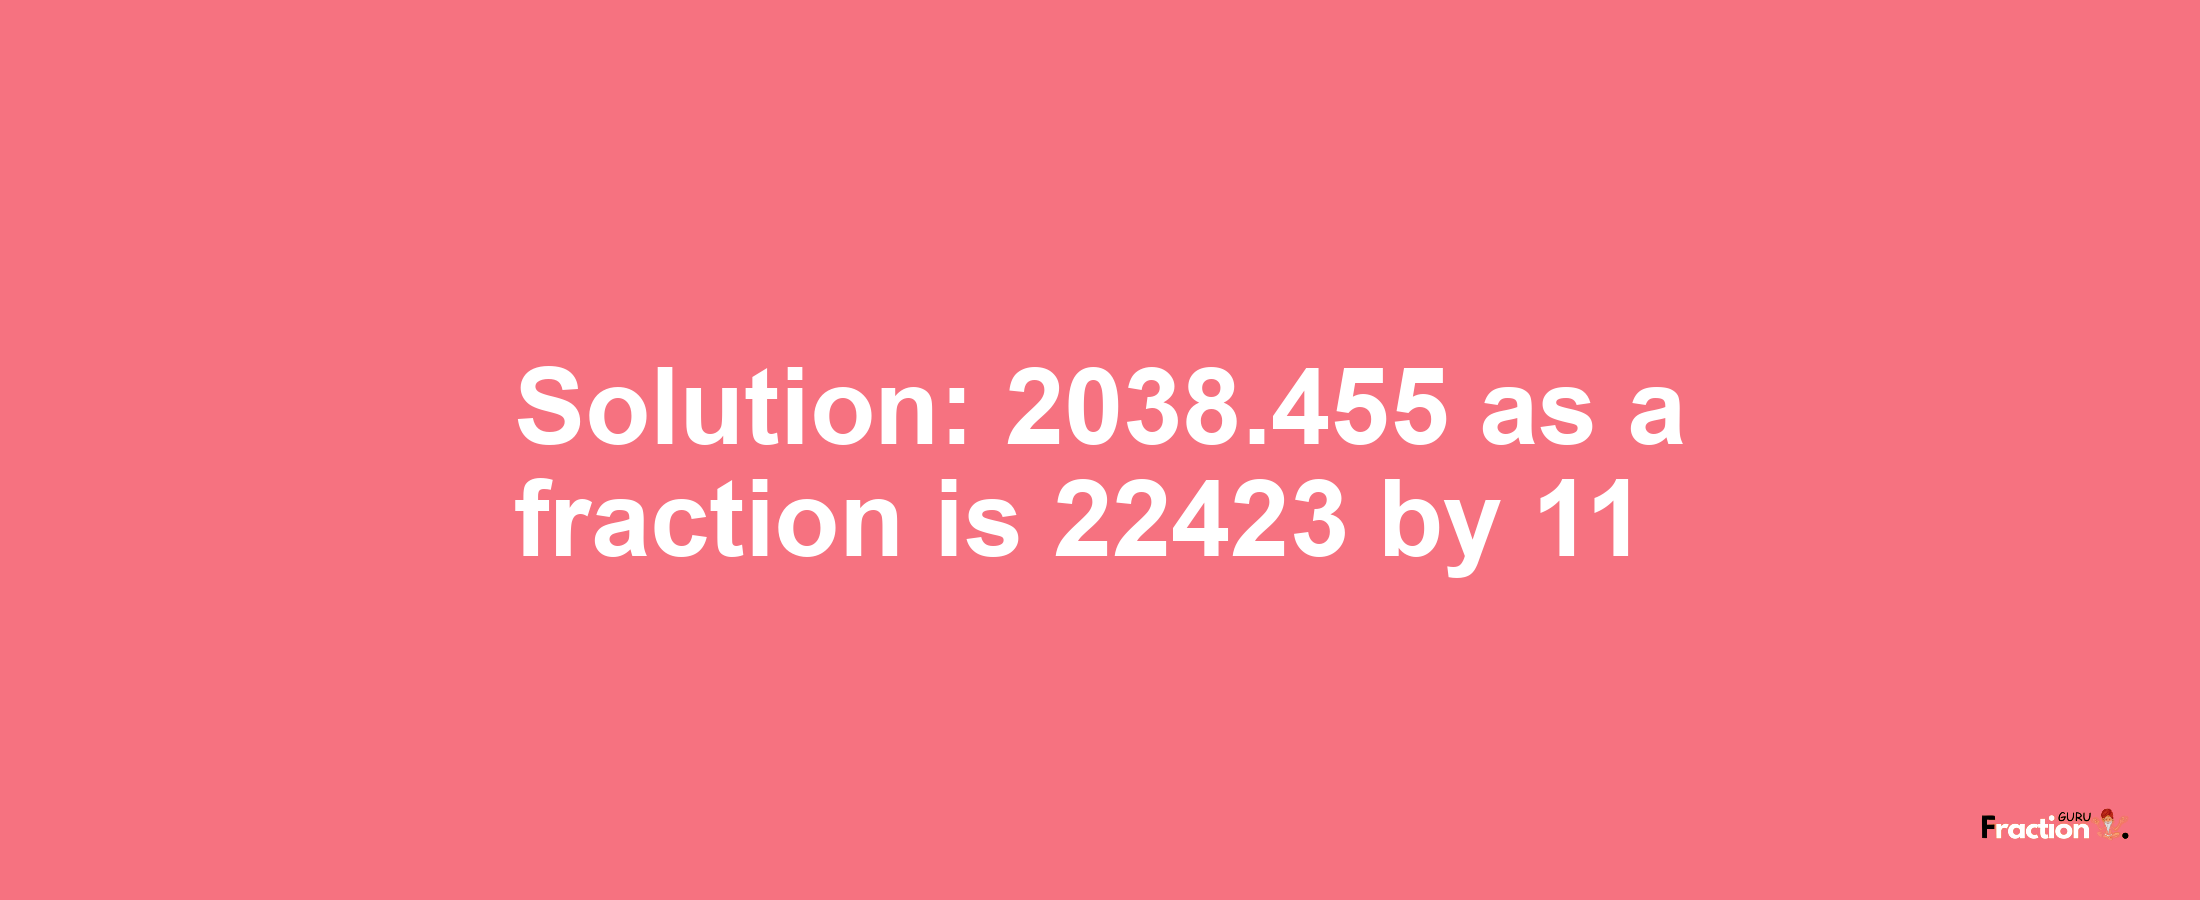 Solution:2038.455 as a fraction is 22423/11